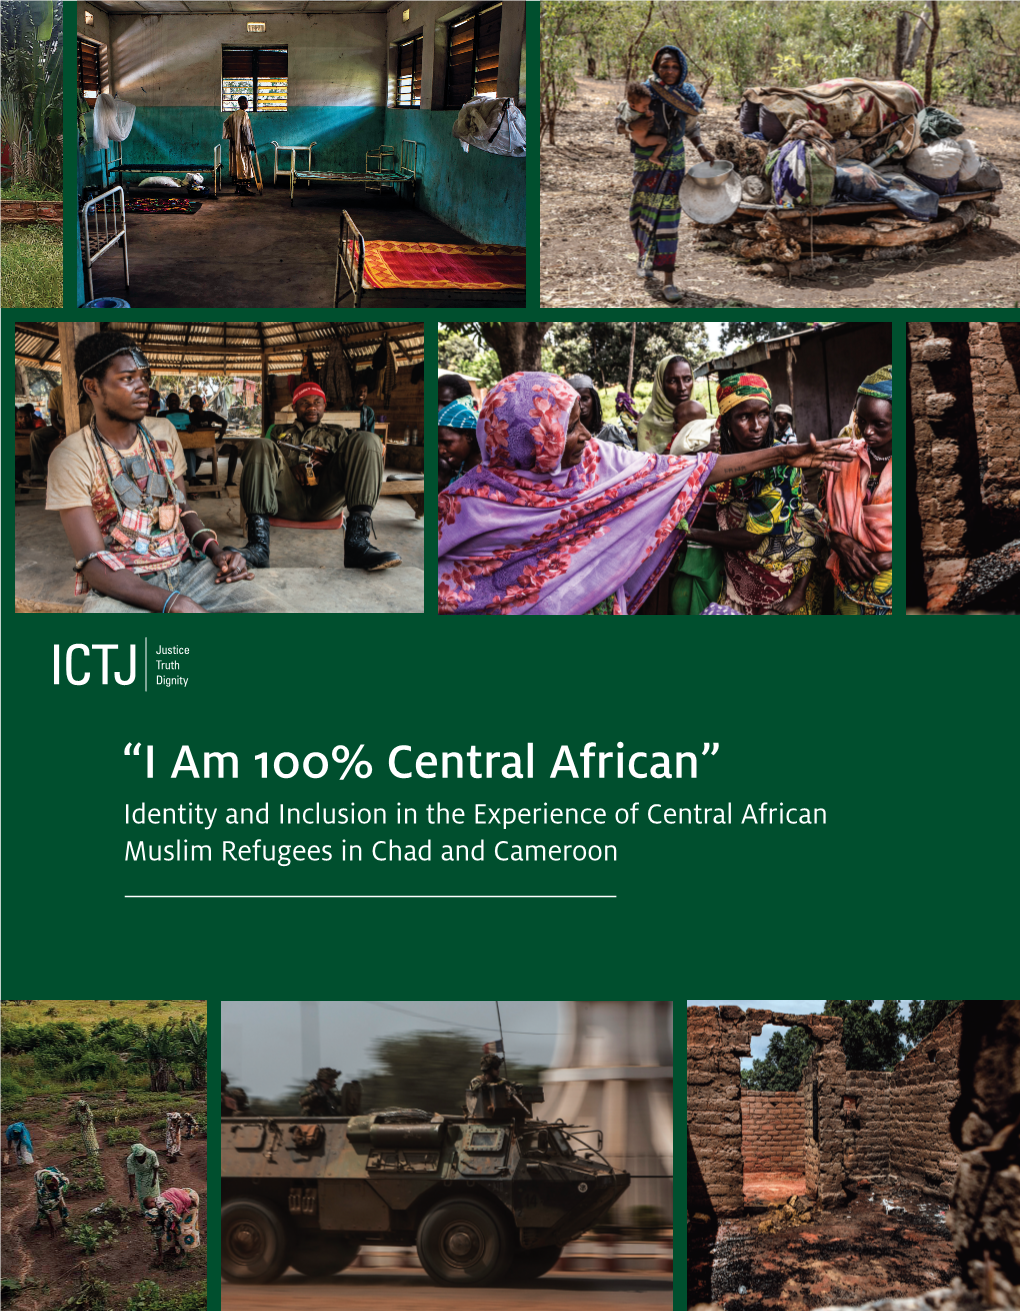 “I Am 100% Central African” Identity and Inclusion in the Experience of Central African Muslim Refugees in Chad and Cameroon